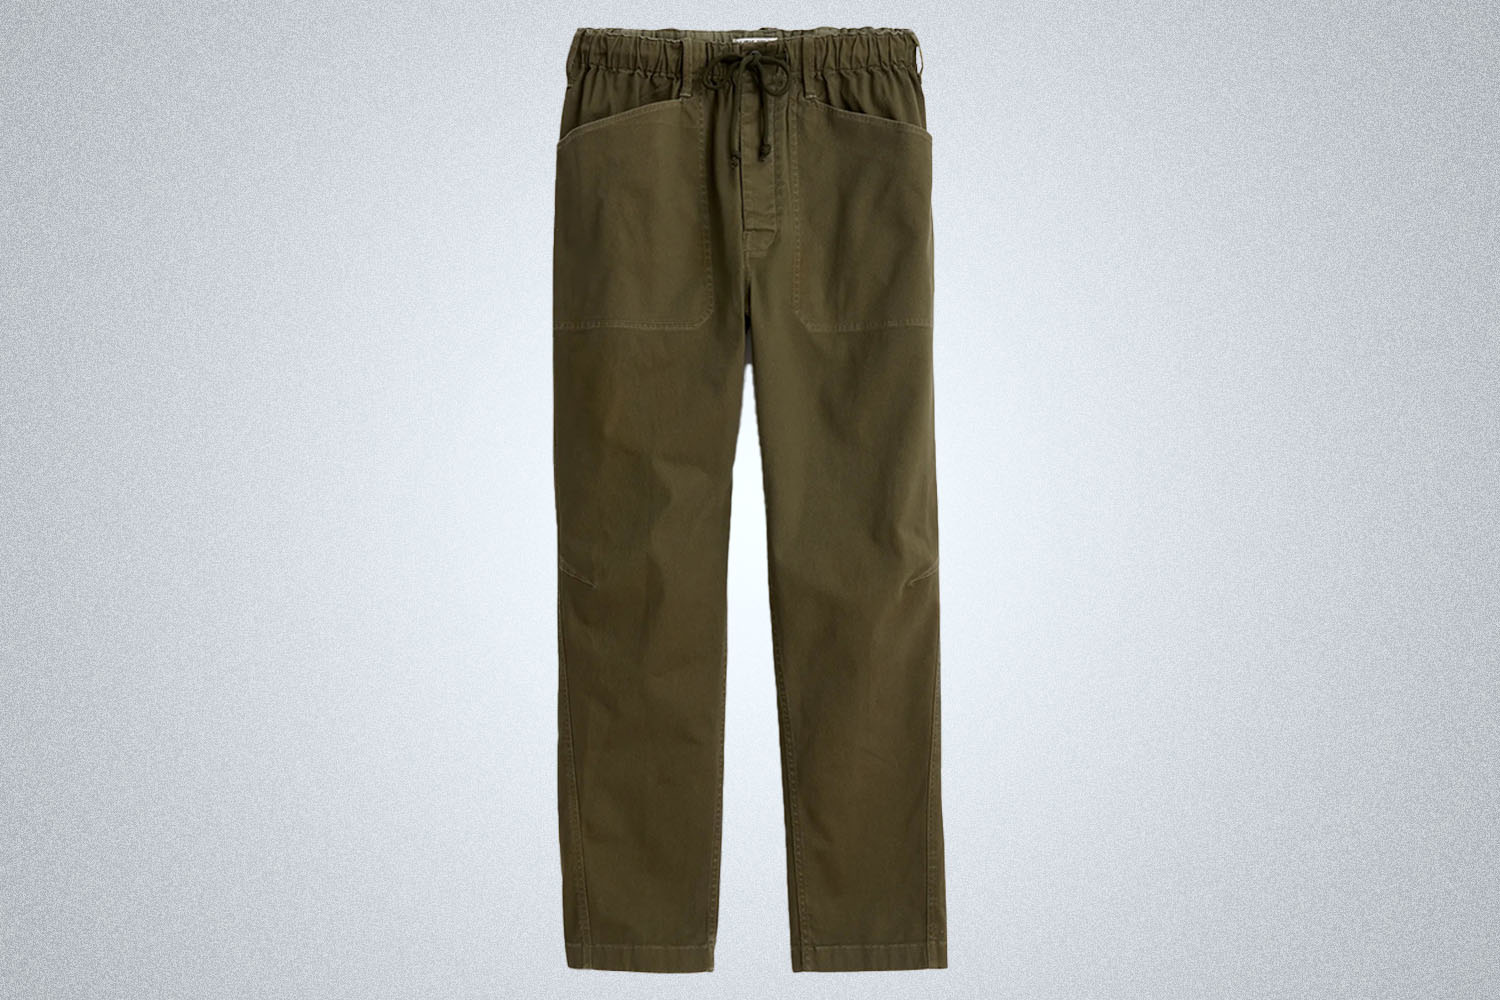 11 Best Summer Work Pants for Hot Weather [Lightweight & Breathable] – Work  Wear Command